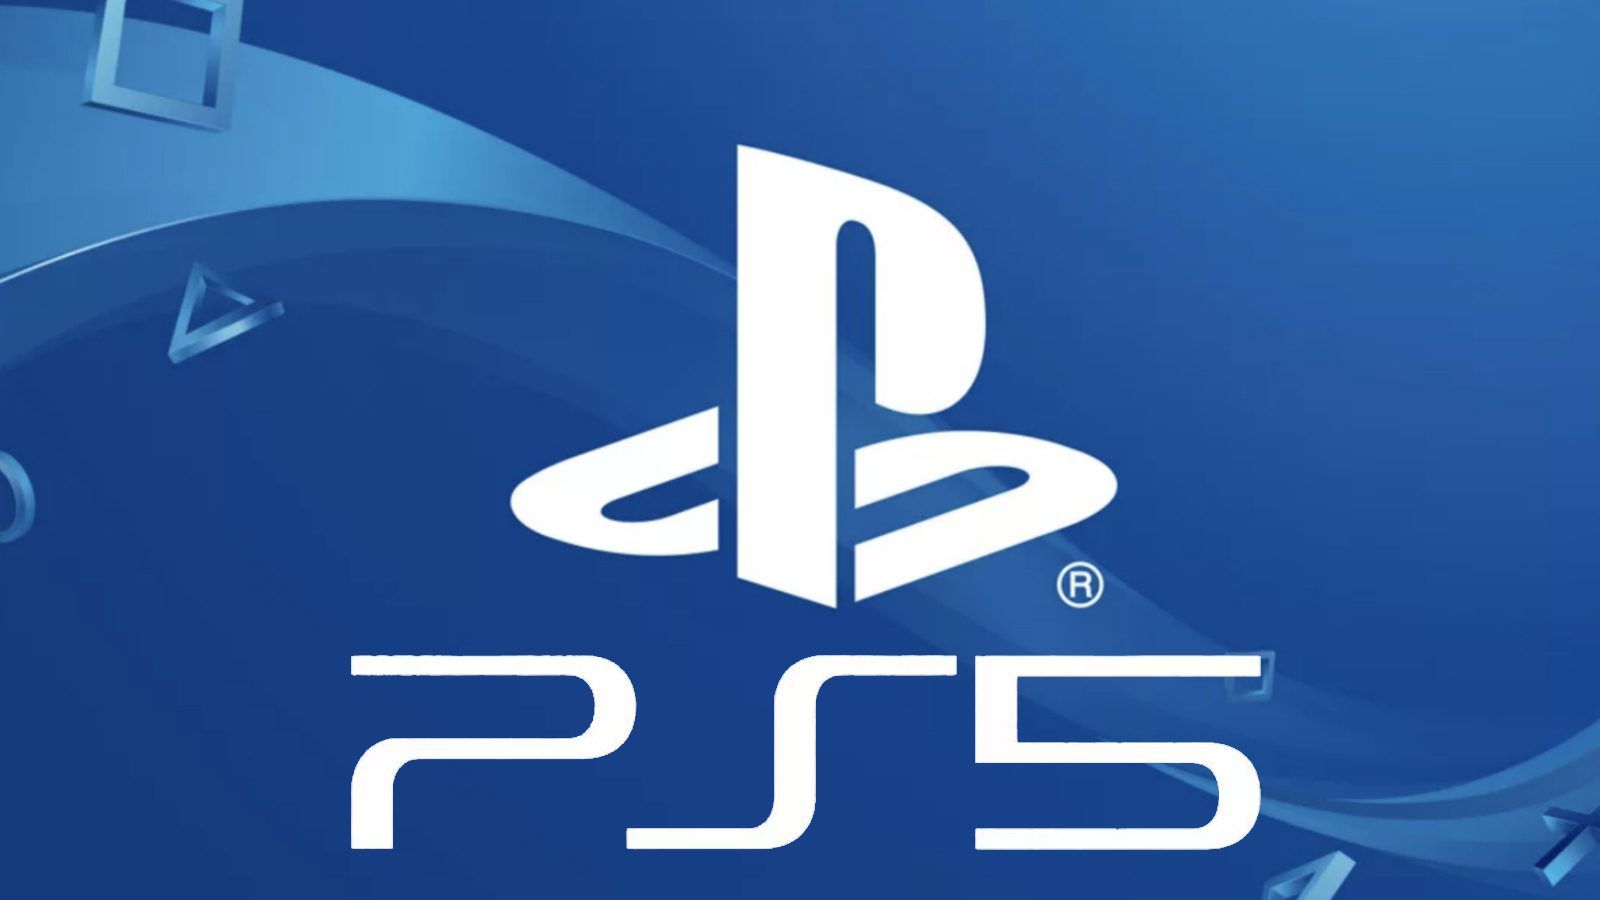 #PS5 @PlayStation confirmed to be coming before Christmas 2020 including a next-gen PS5 controller